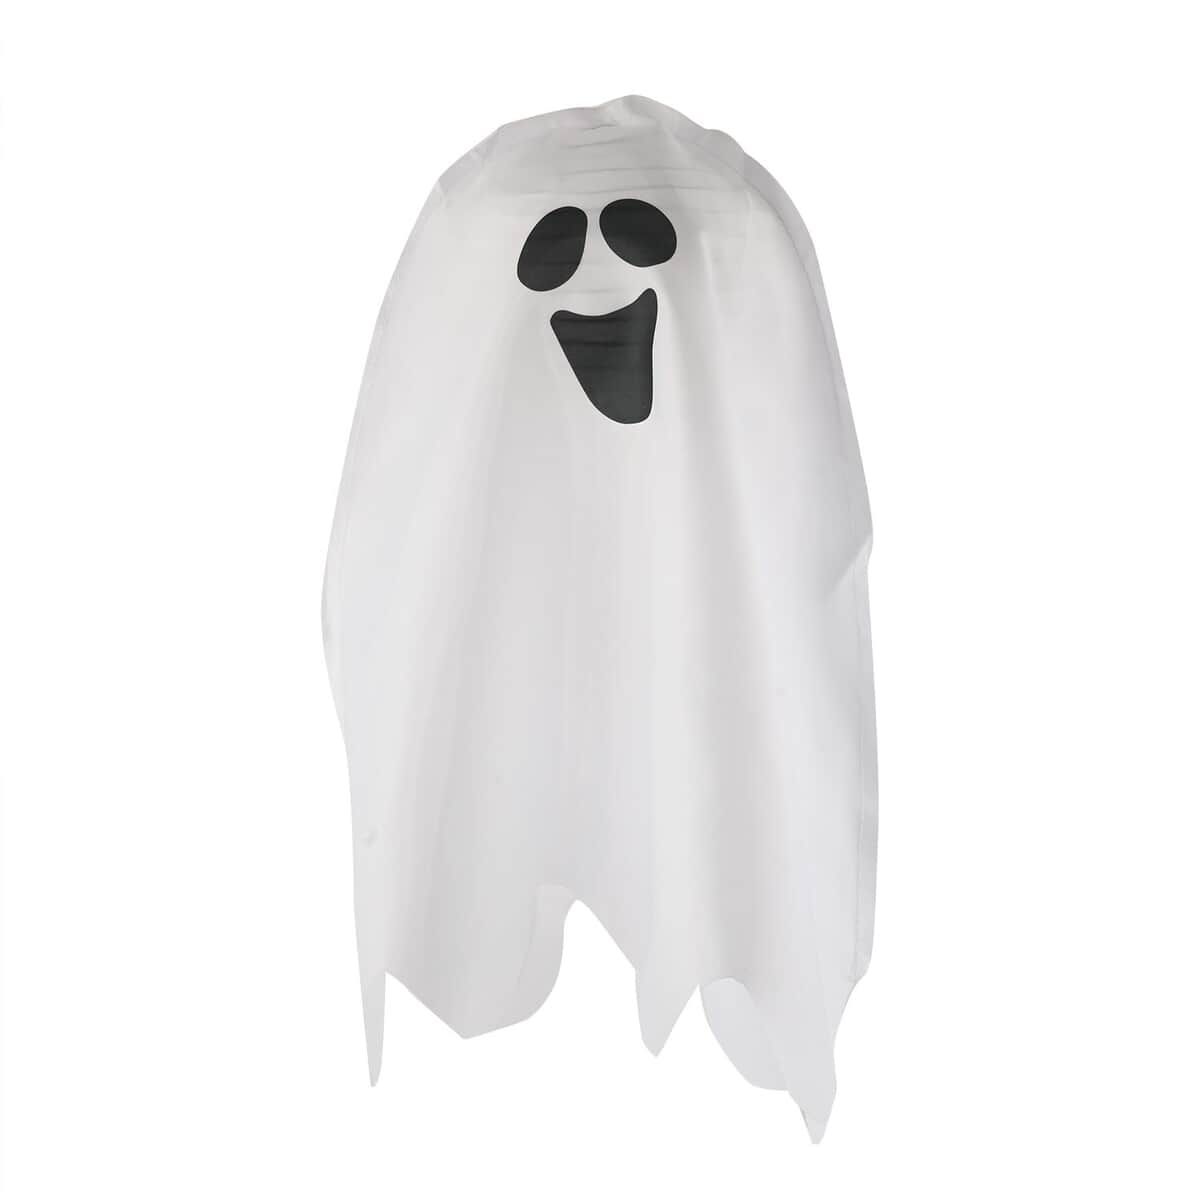 Halloween- 18 Inches Colorchange Light-up Hanging Paper Lantern Ghost image number 0